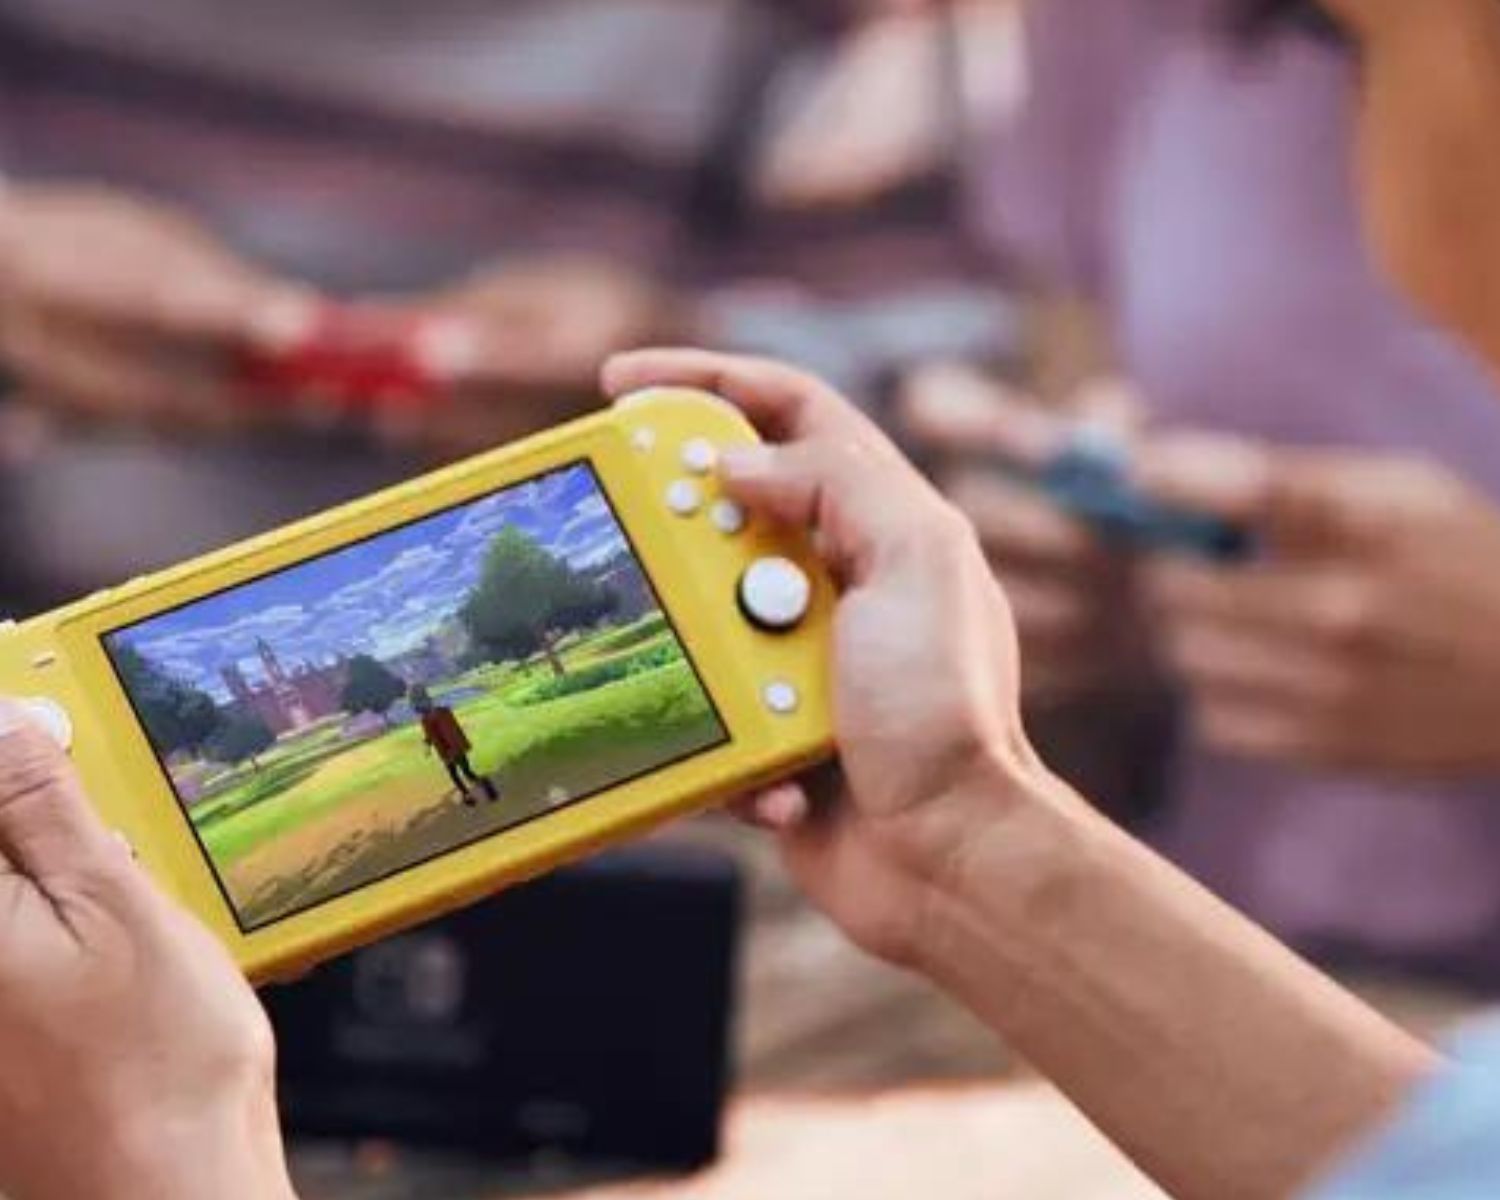 A person's hands holding a yellow Nintendo Switch